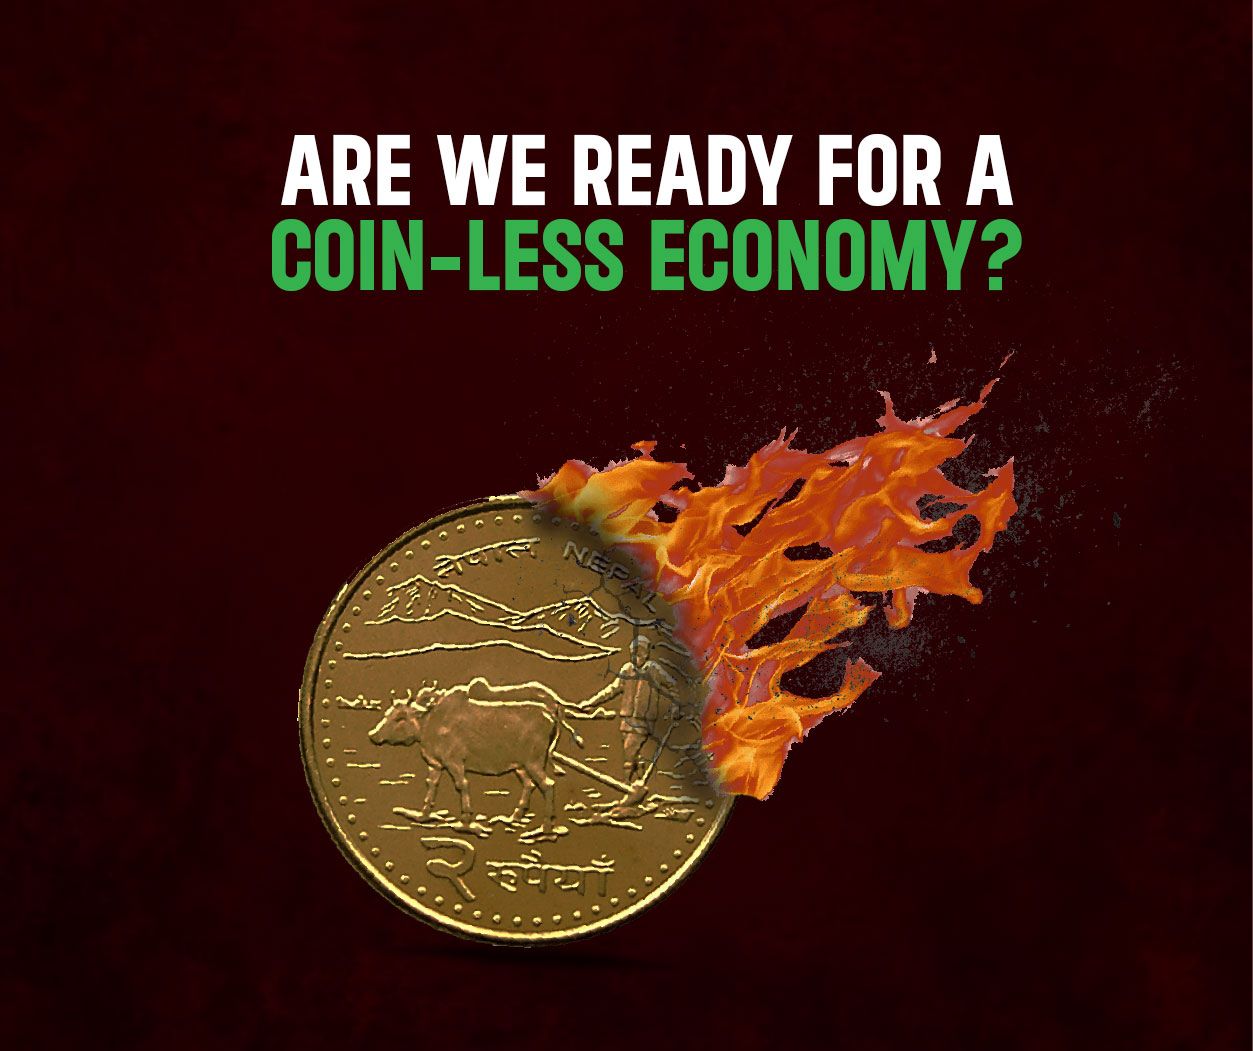 Are We Ready for a Coin-Less Economy?